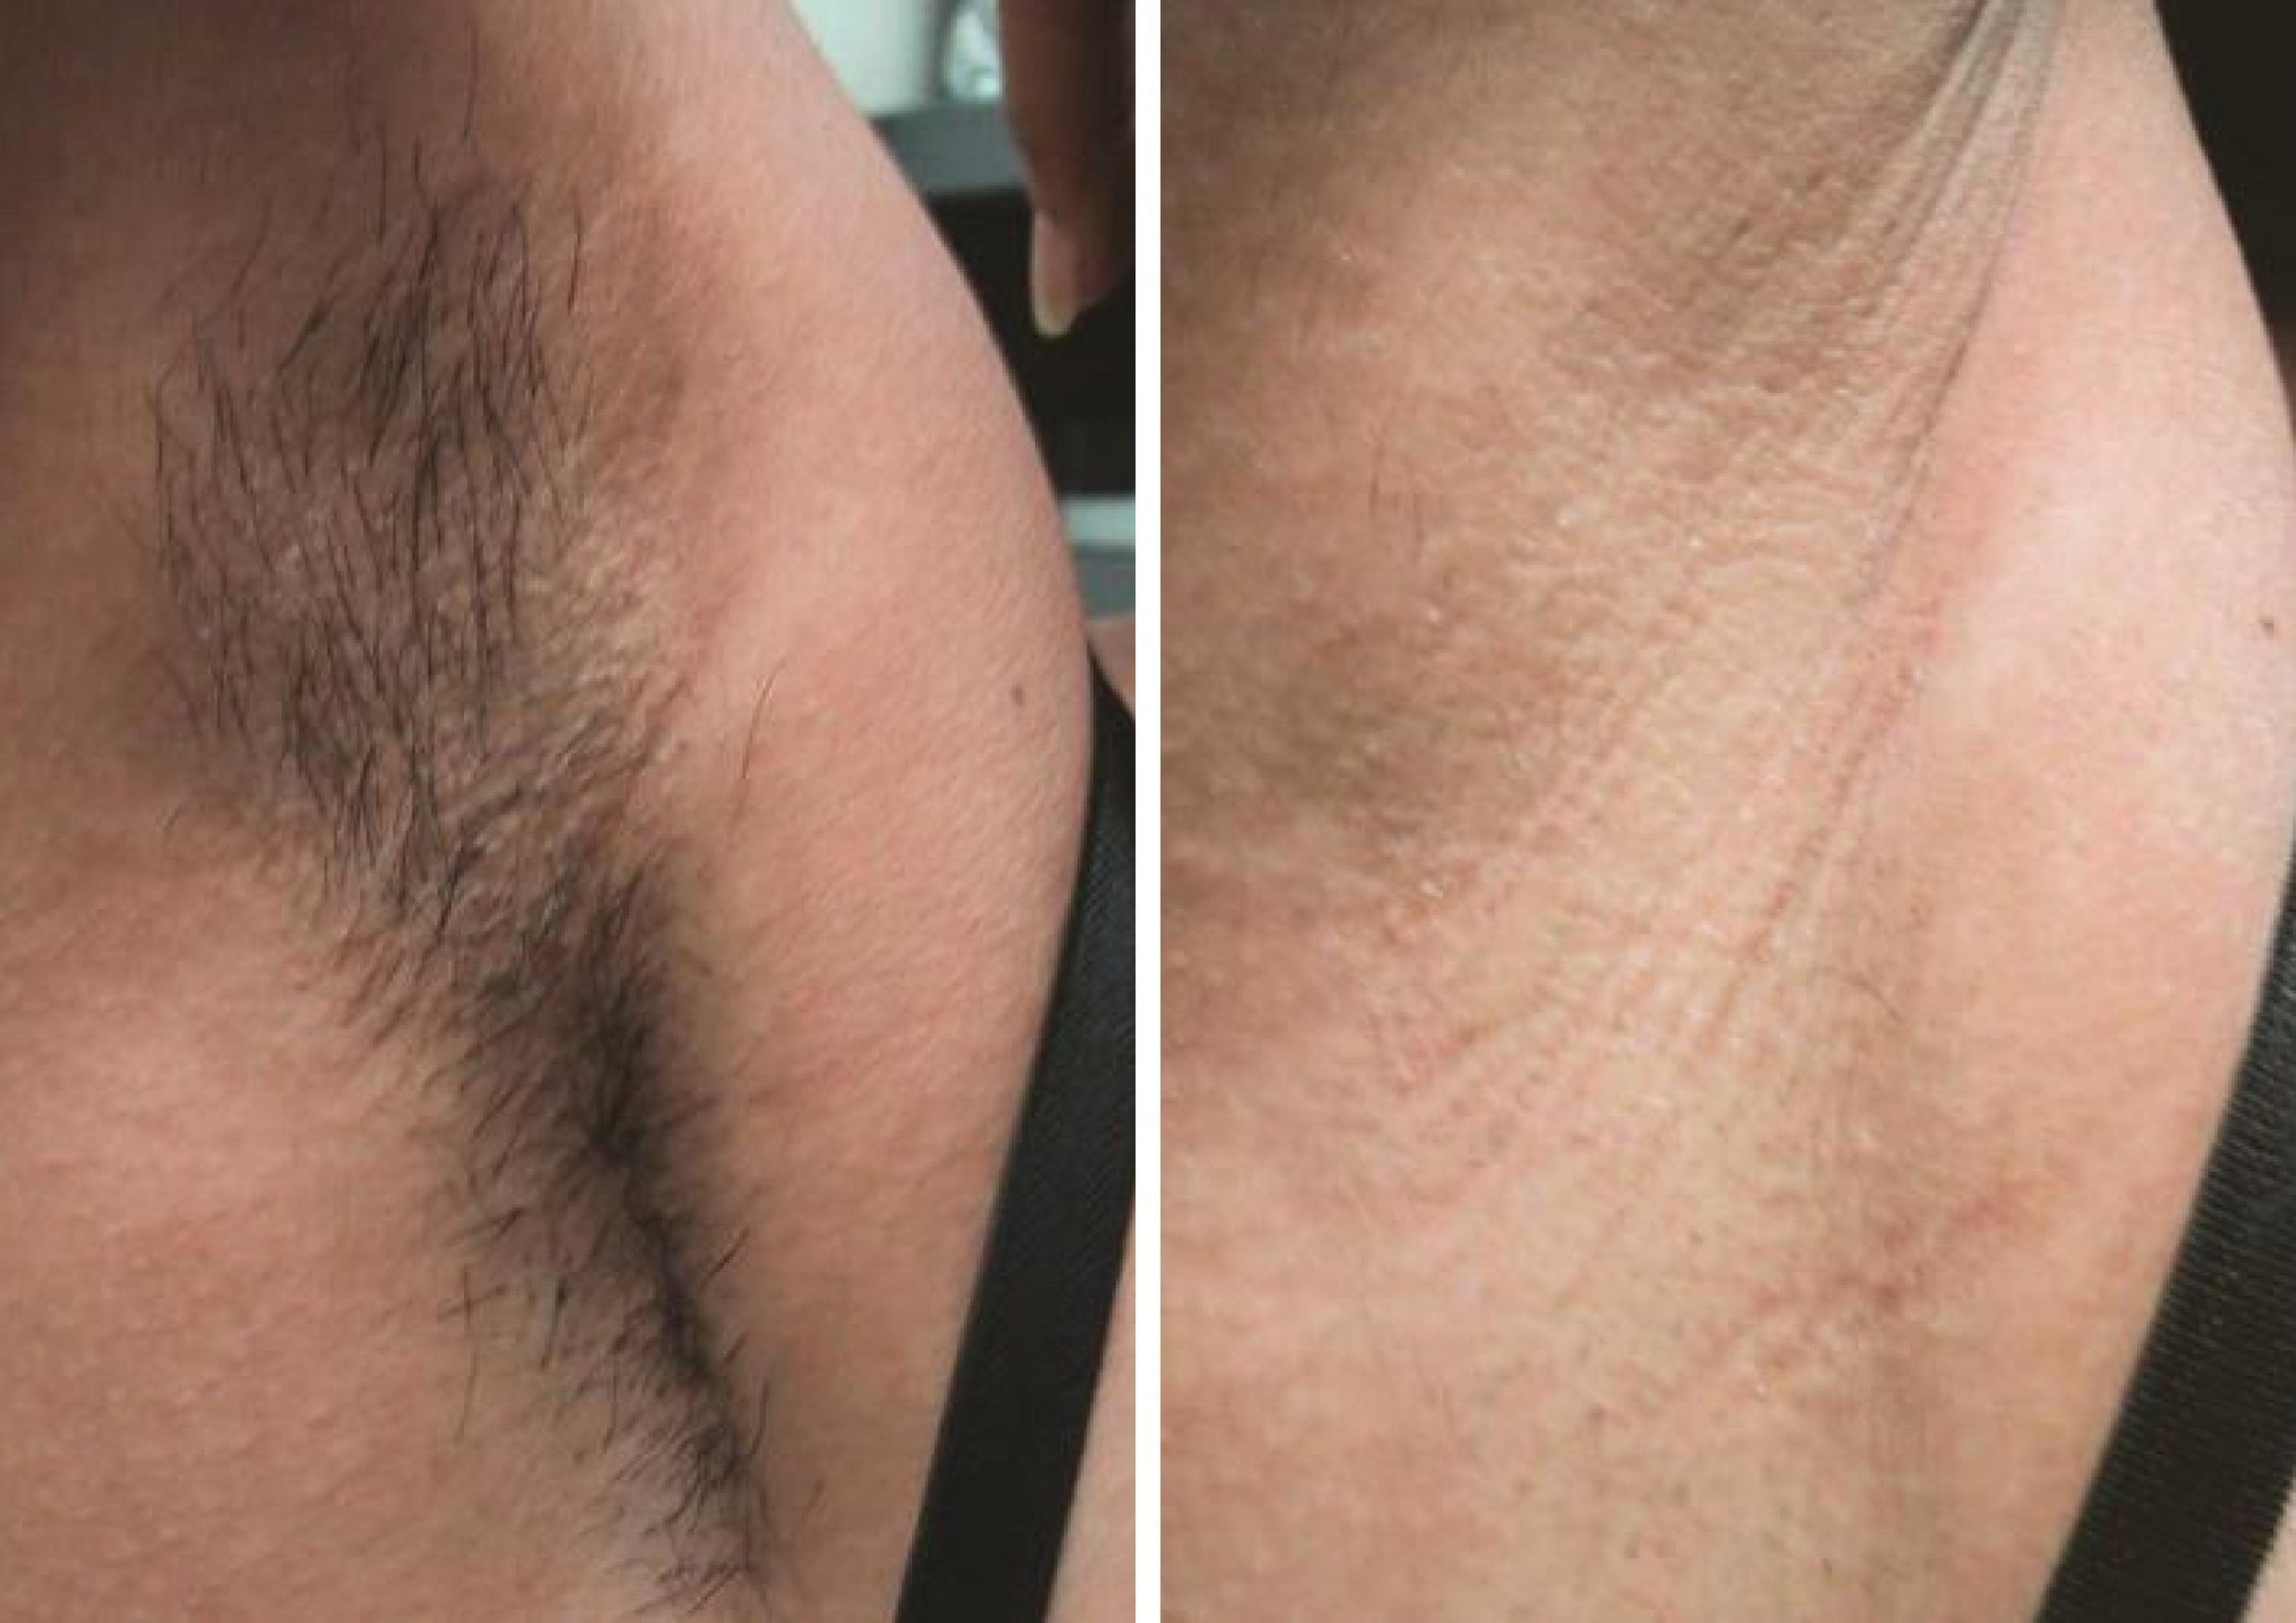 laser-hair-removal-before-and-after-2-scaled.jpg